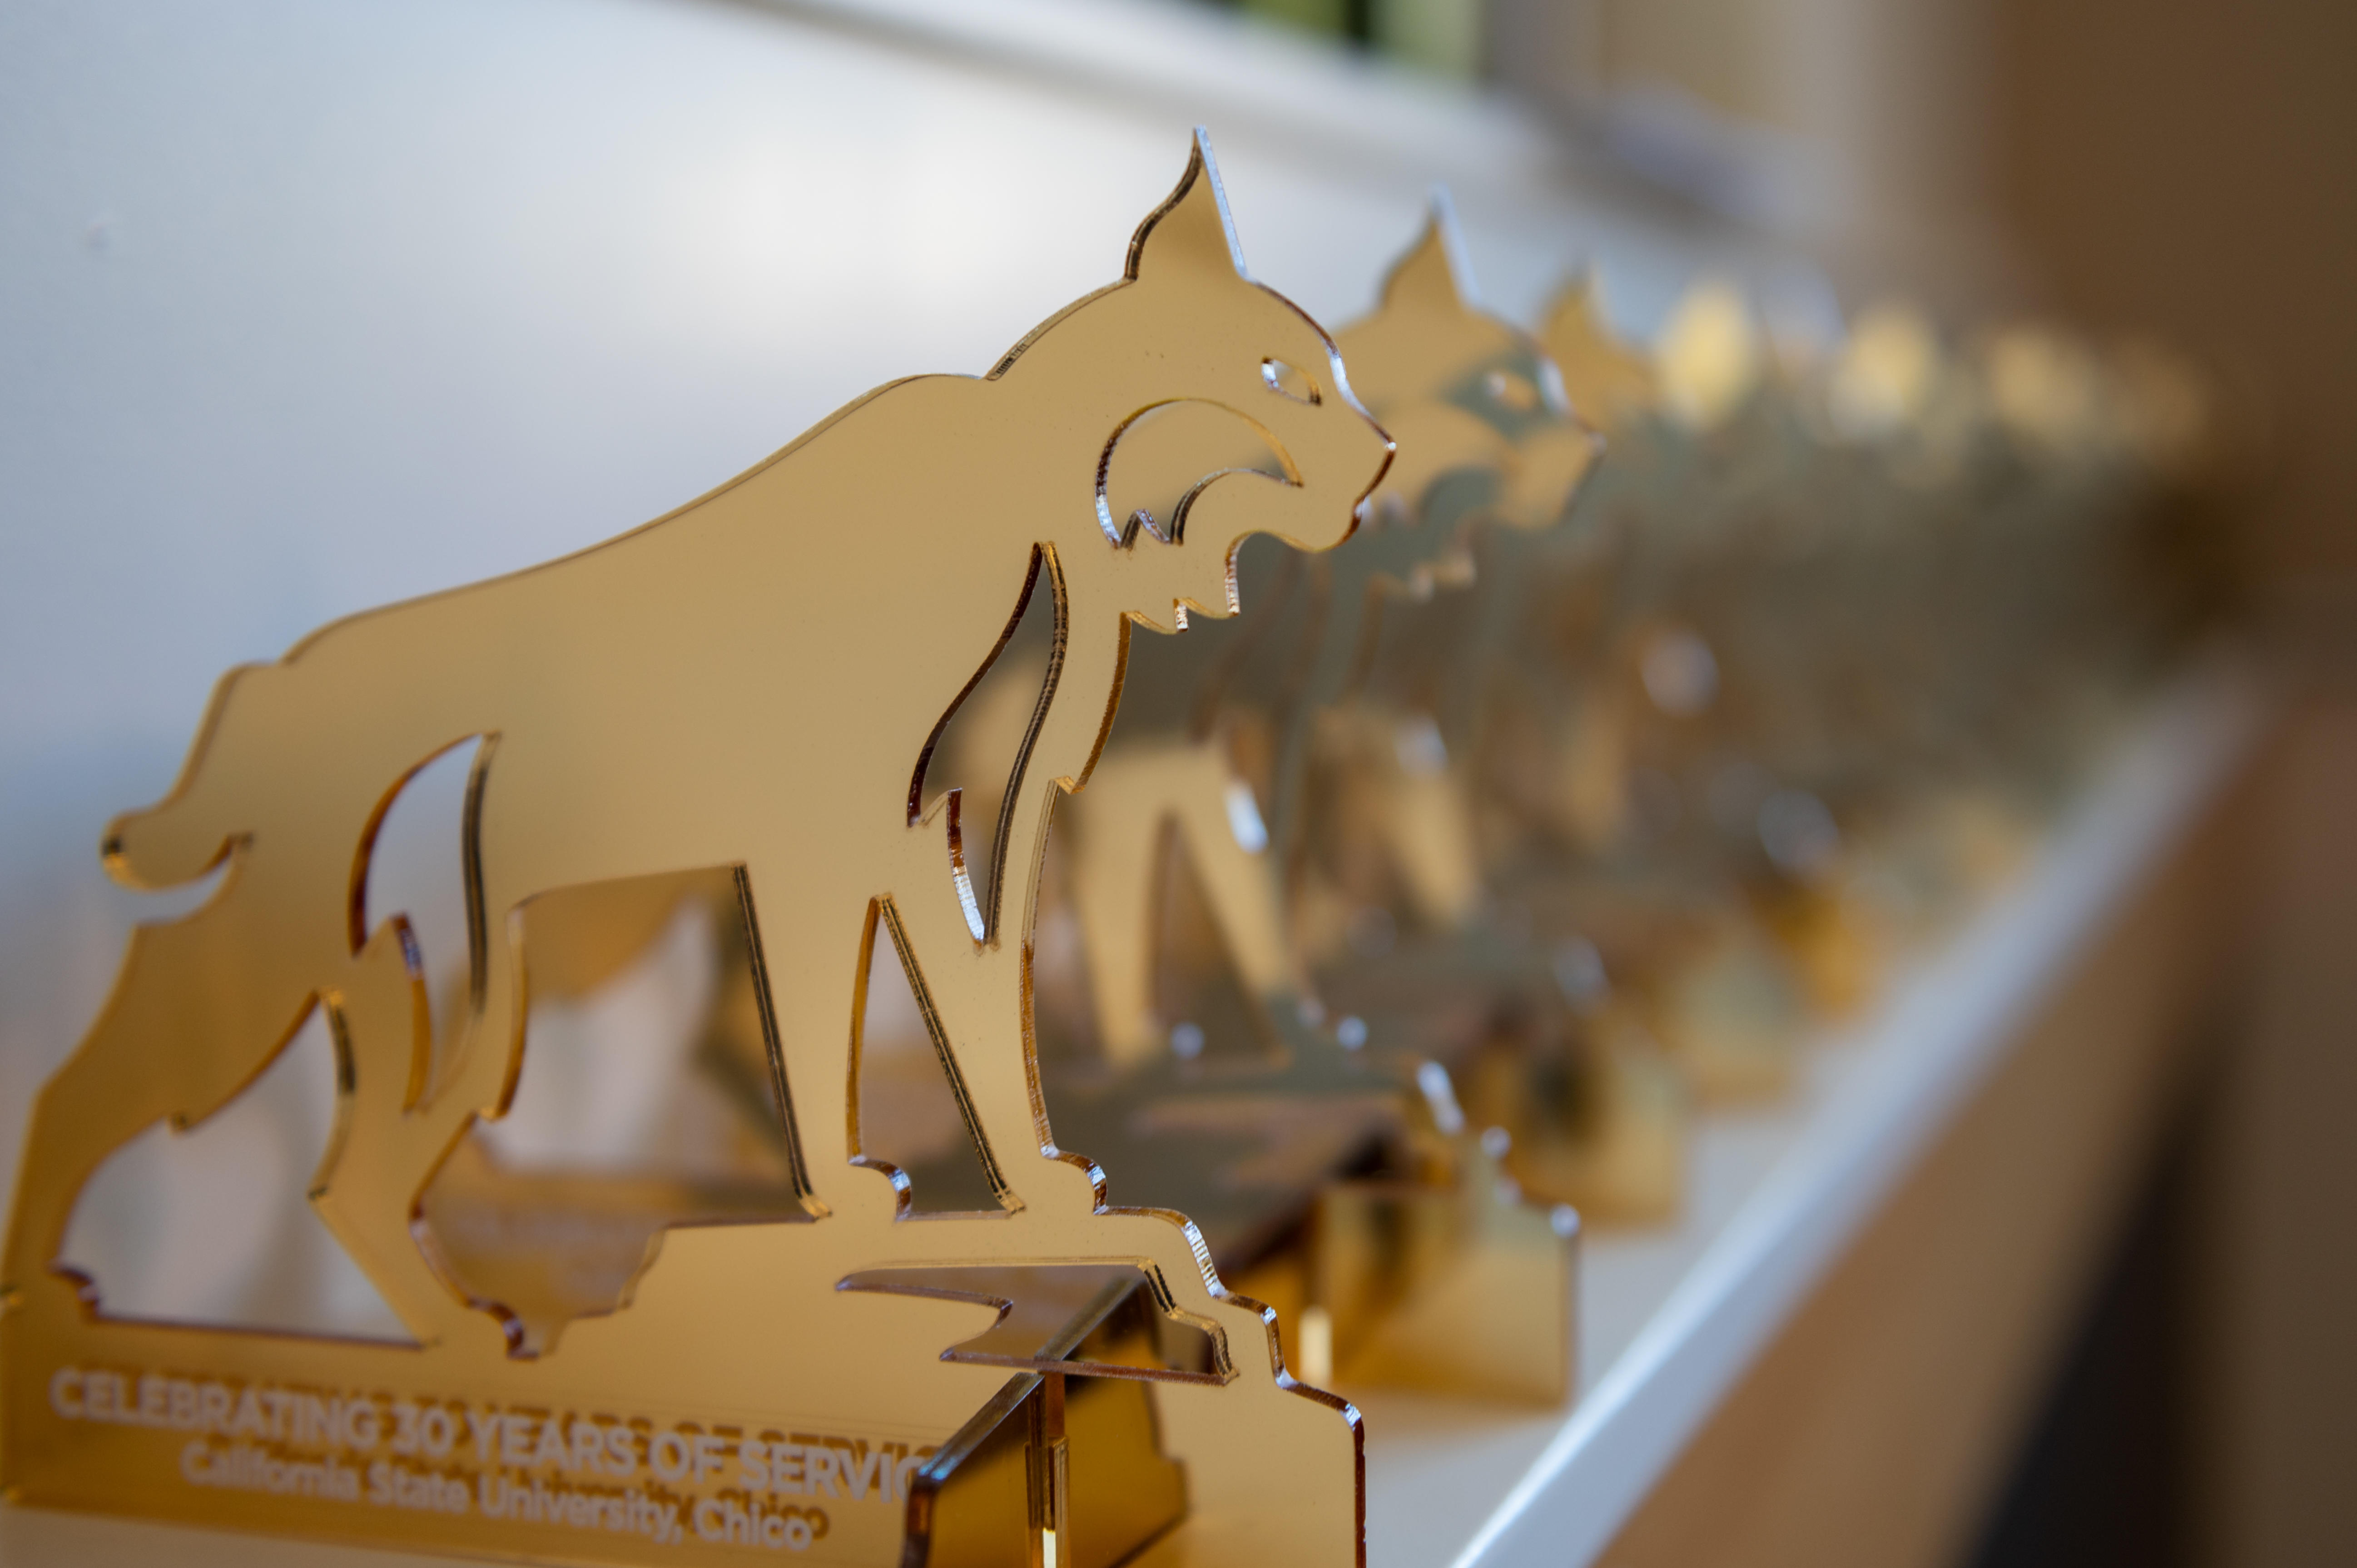 Awards of gold color wildcats